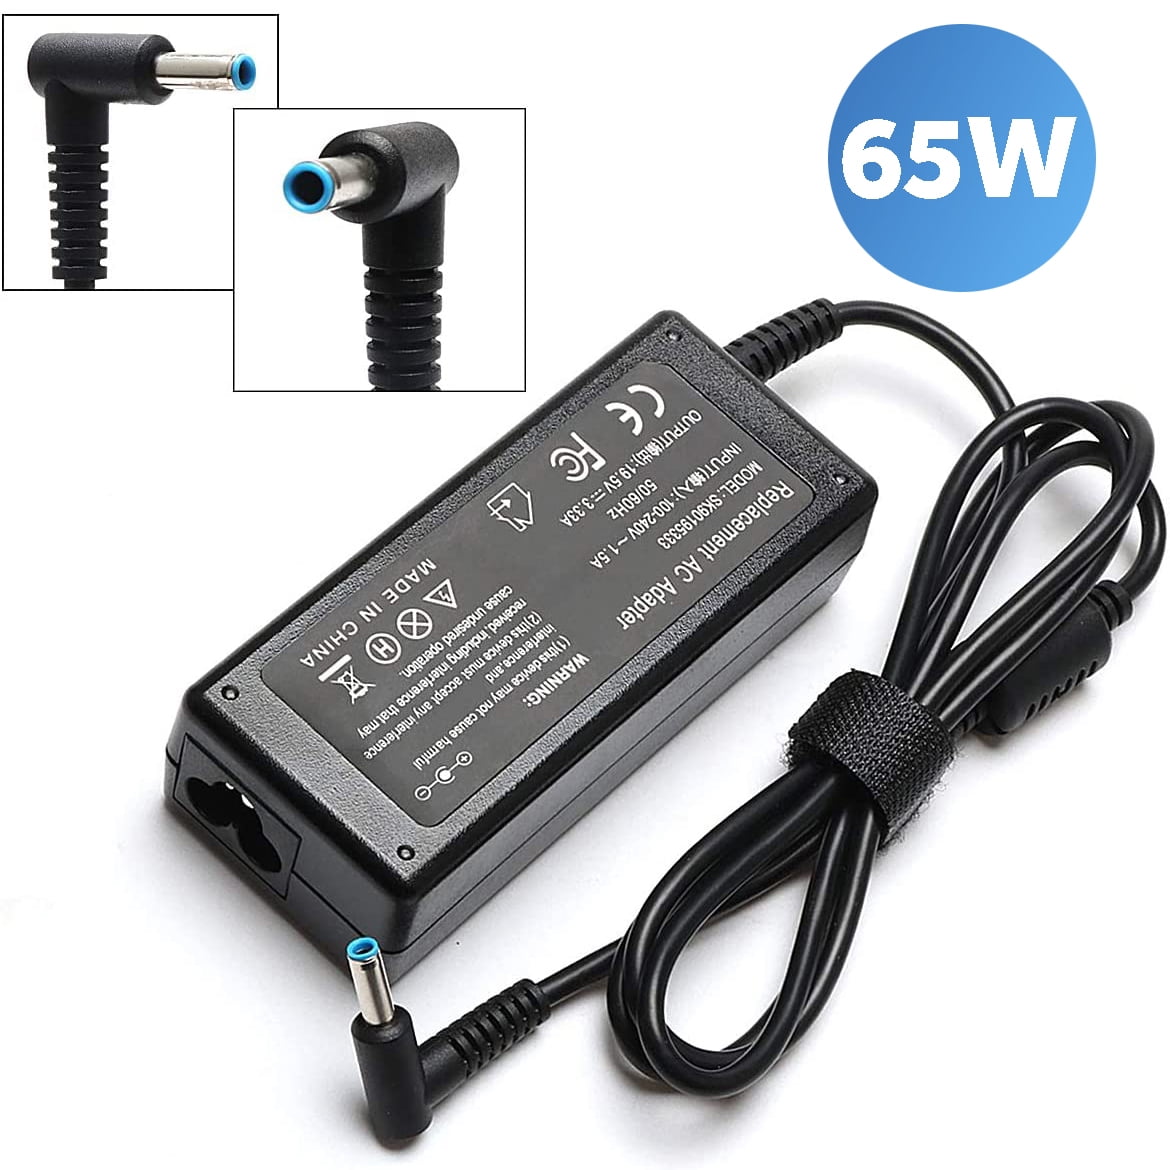 65W 19.5V 3.33A Power Adapter Charger New for HP ProBook 640 G2 650 G2 430 G3 450 G3 440 G3 455 G3 470 G3 719309-003 741727-001 740015-001 709985-002 Notebook Power Supply Cord 